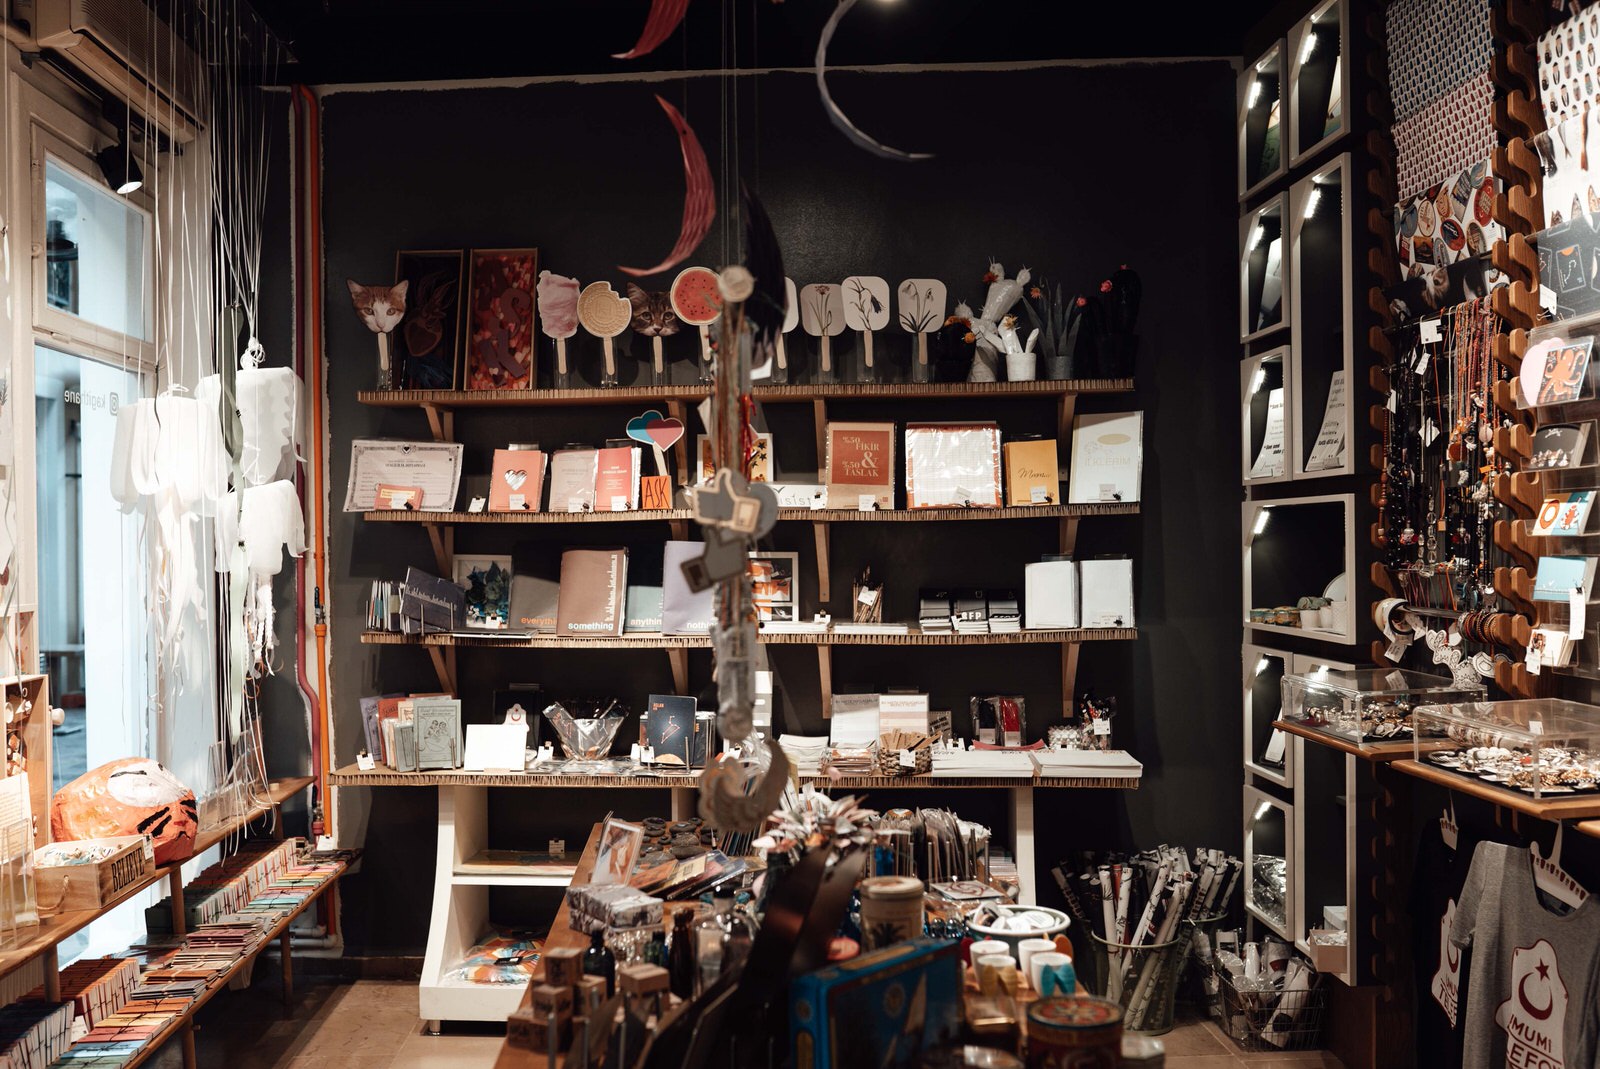 An art shop that sells photography prints, stationery, and art crafts materials.